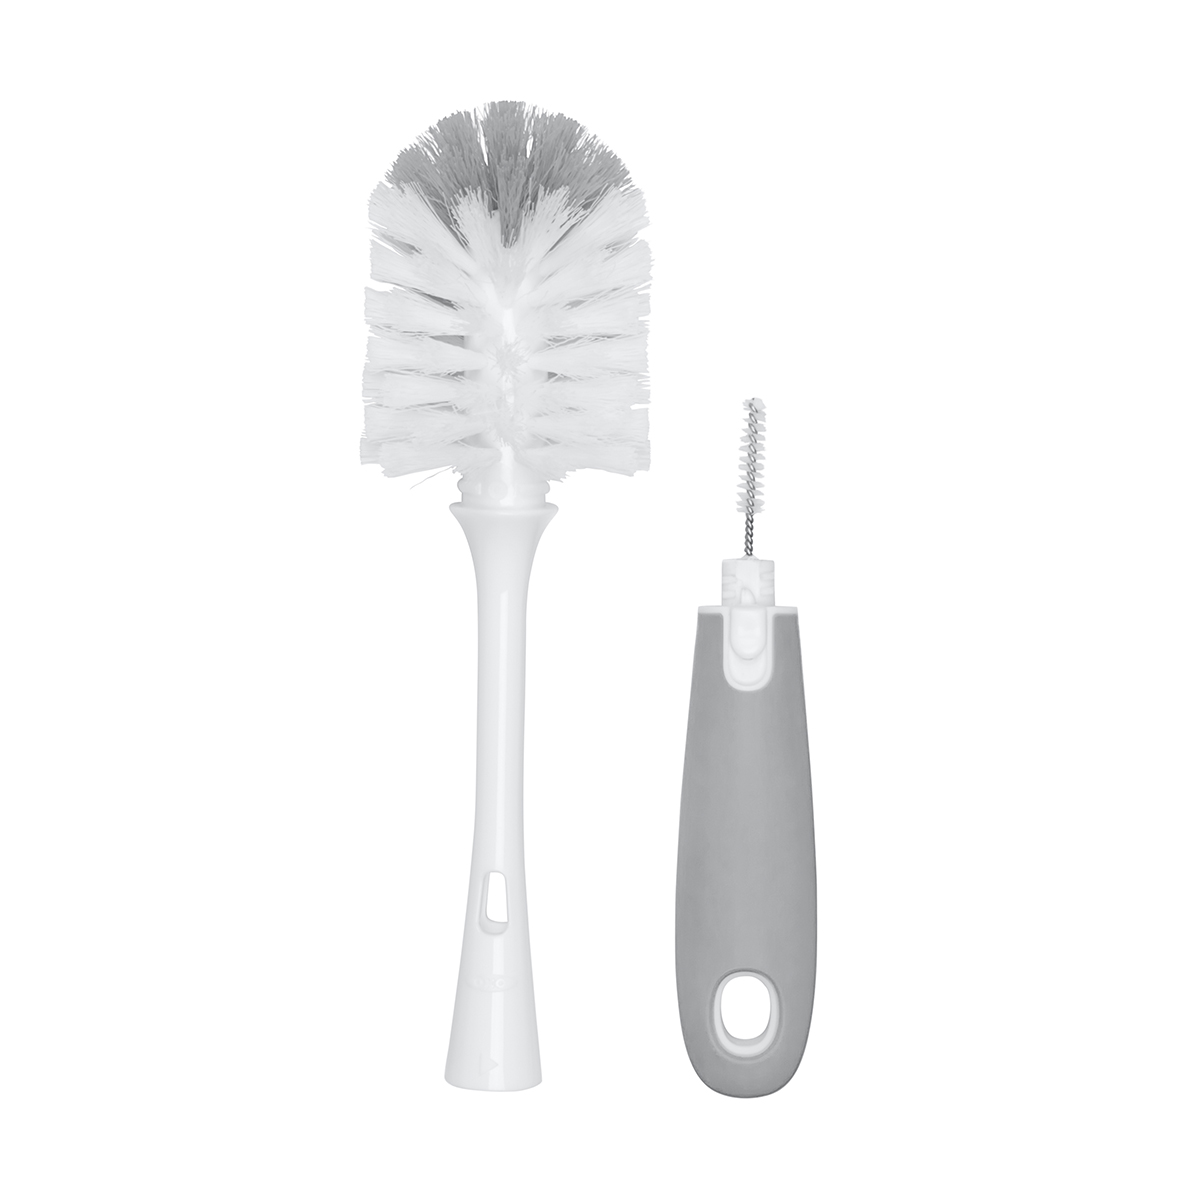 https://www.containerstore.com/catalogimages/405773/10083012%20TOT%20BOTTLE%20BRUSH%20WITH%20STAND.jpg